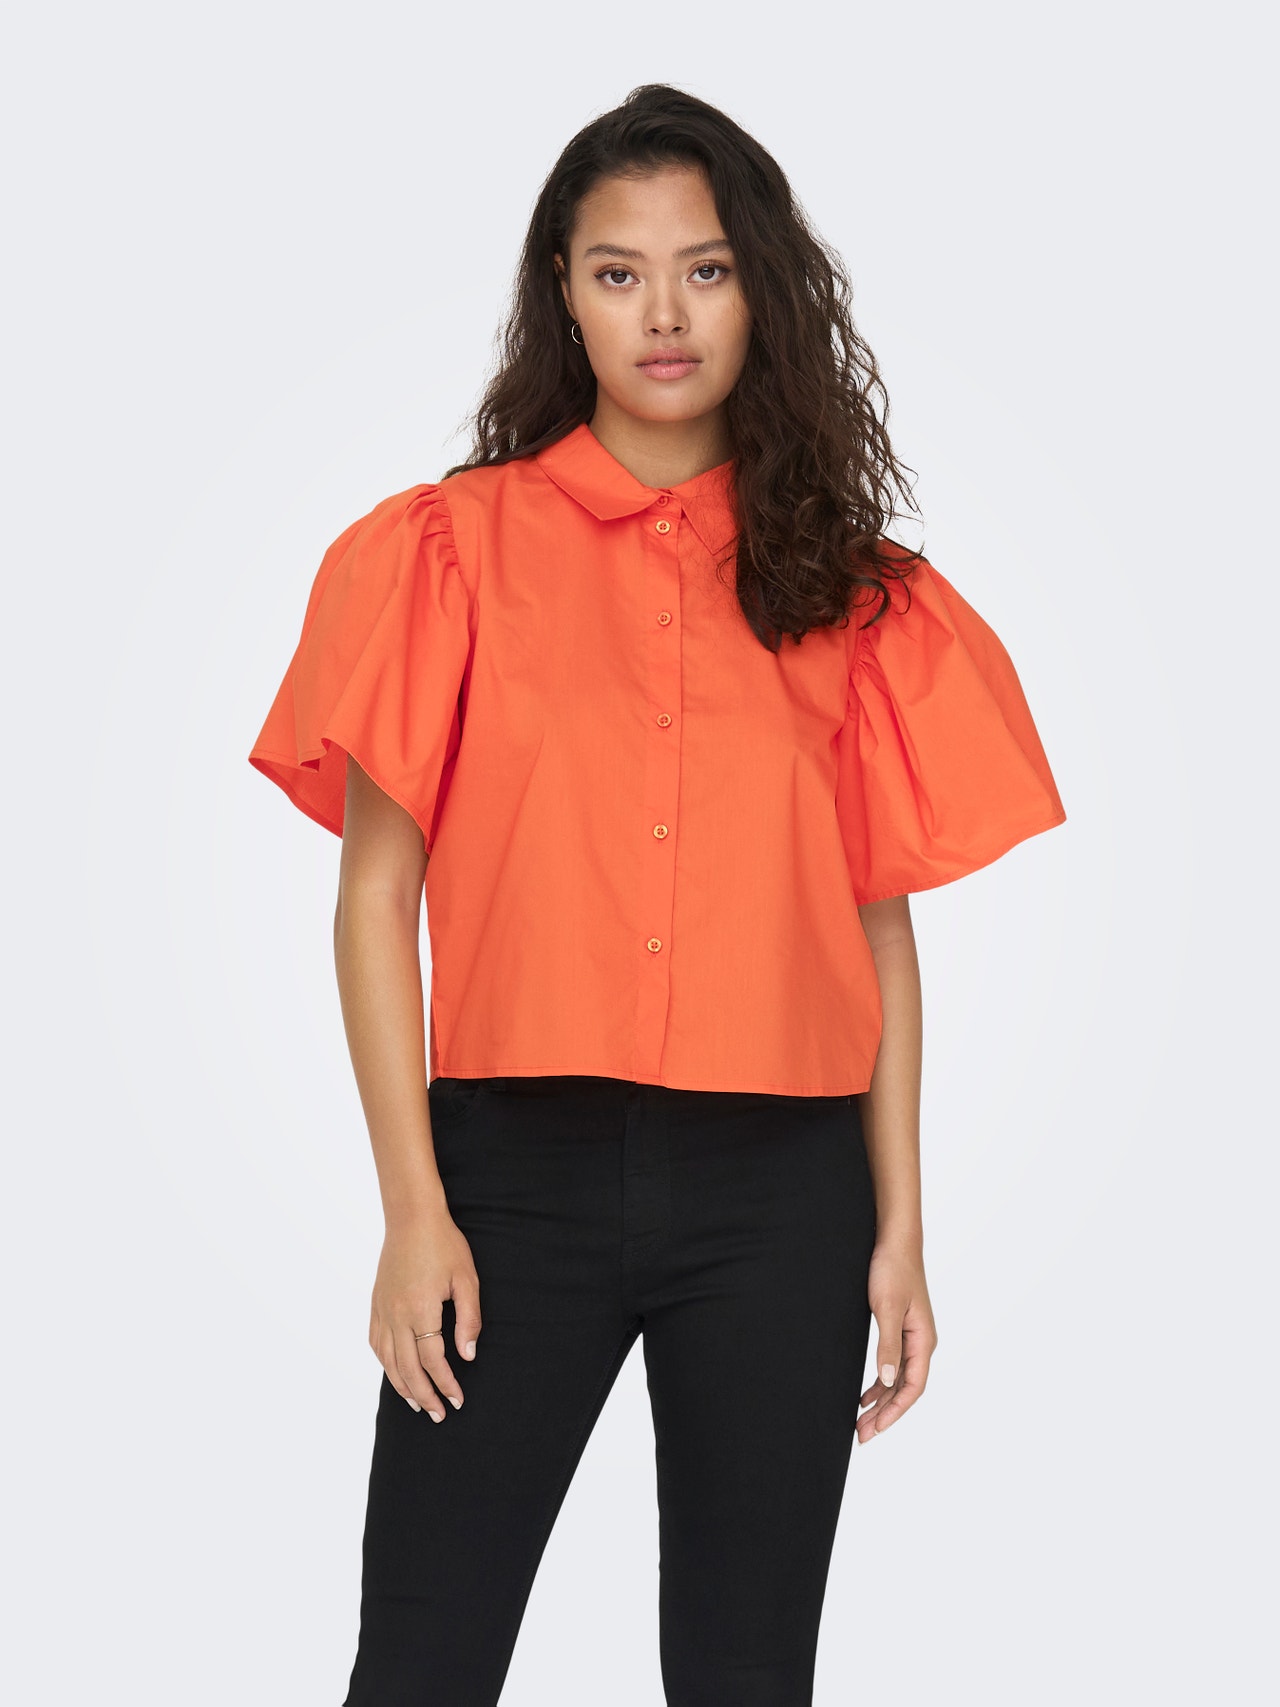 ONLY Shirt with Bell Sleeves -Scarlet Ibis - 15286420